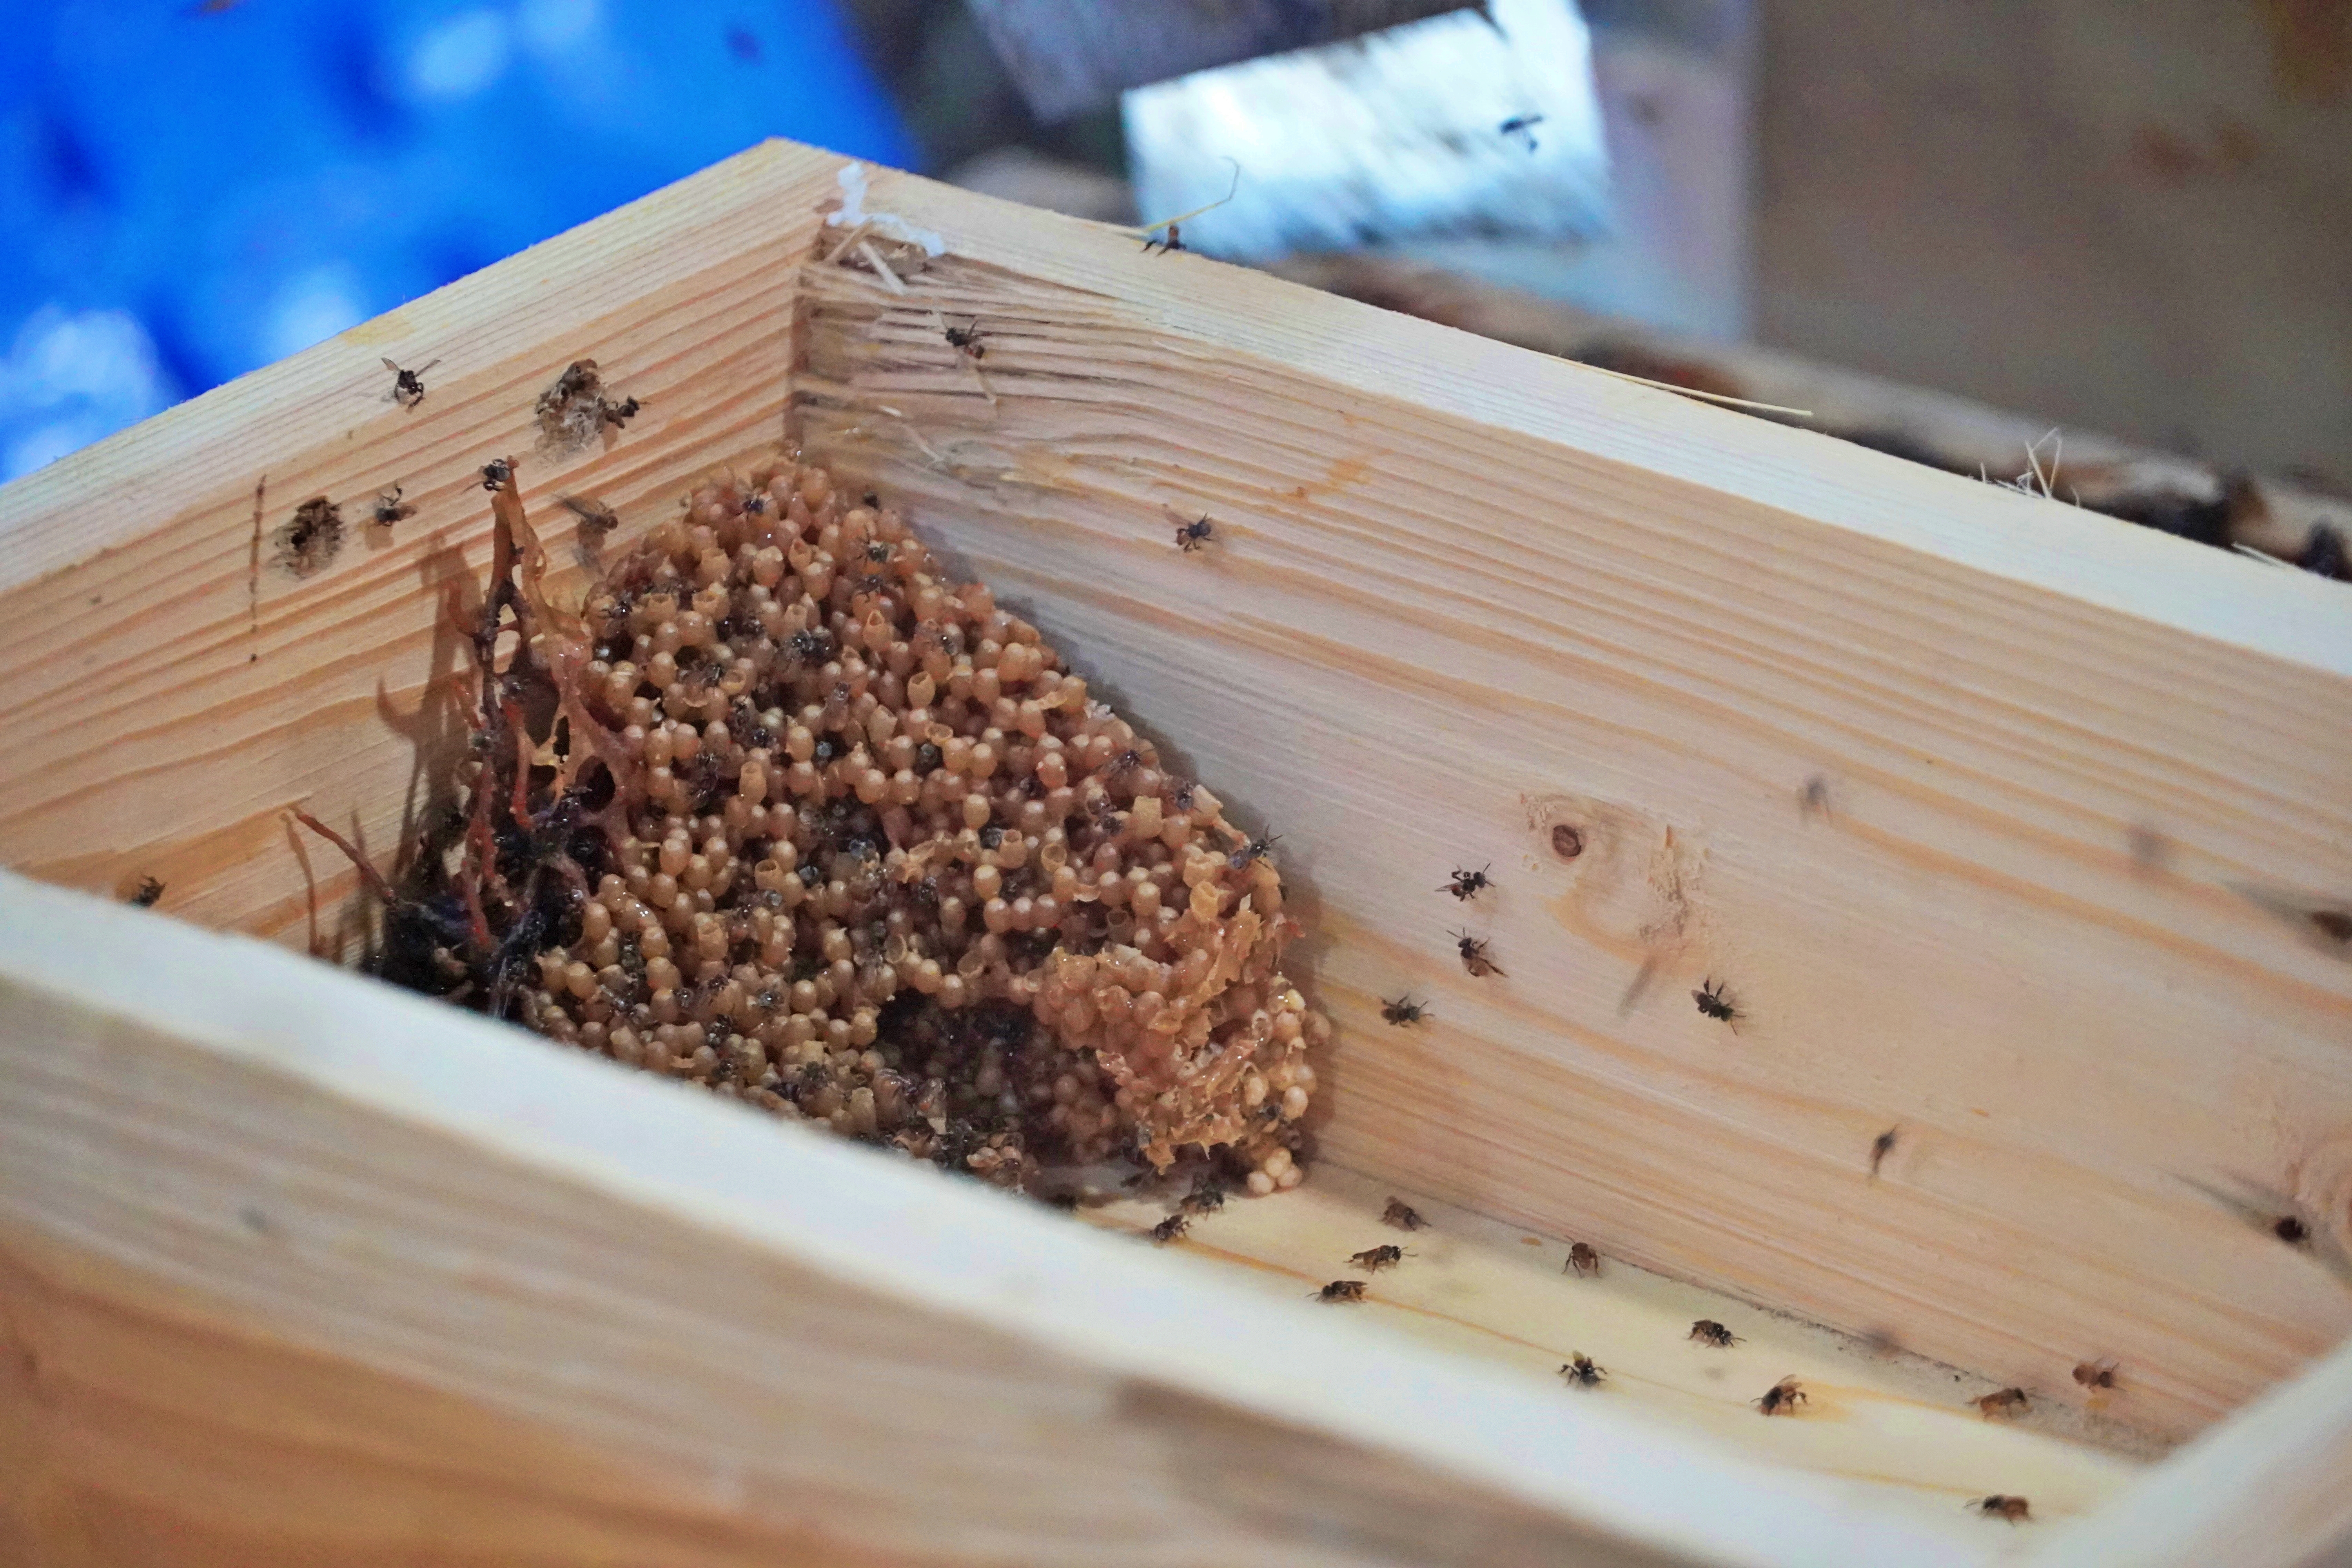 Beehive separation helps increase the new colony's population and pollination rate